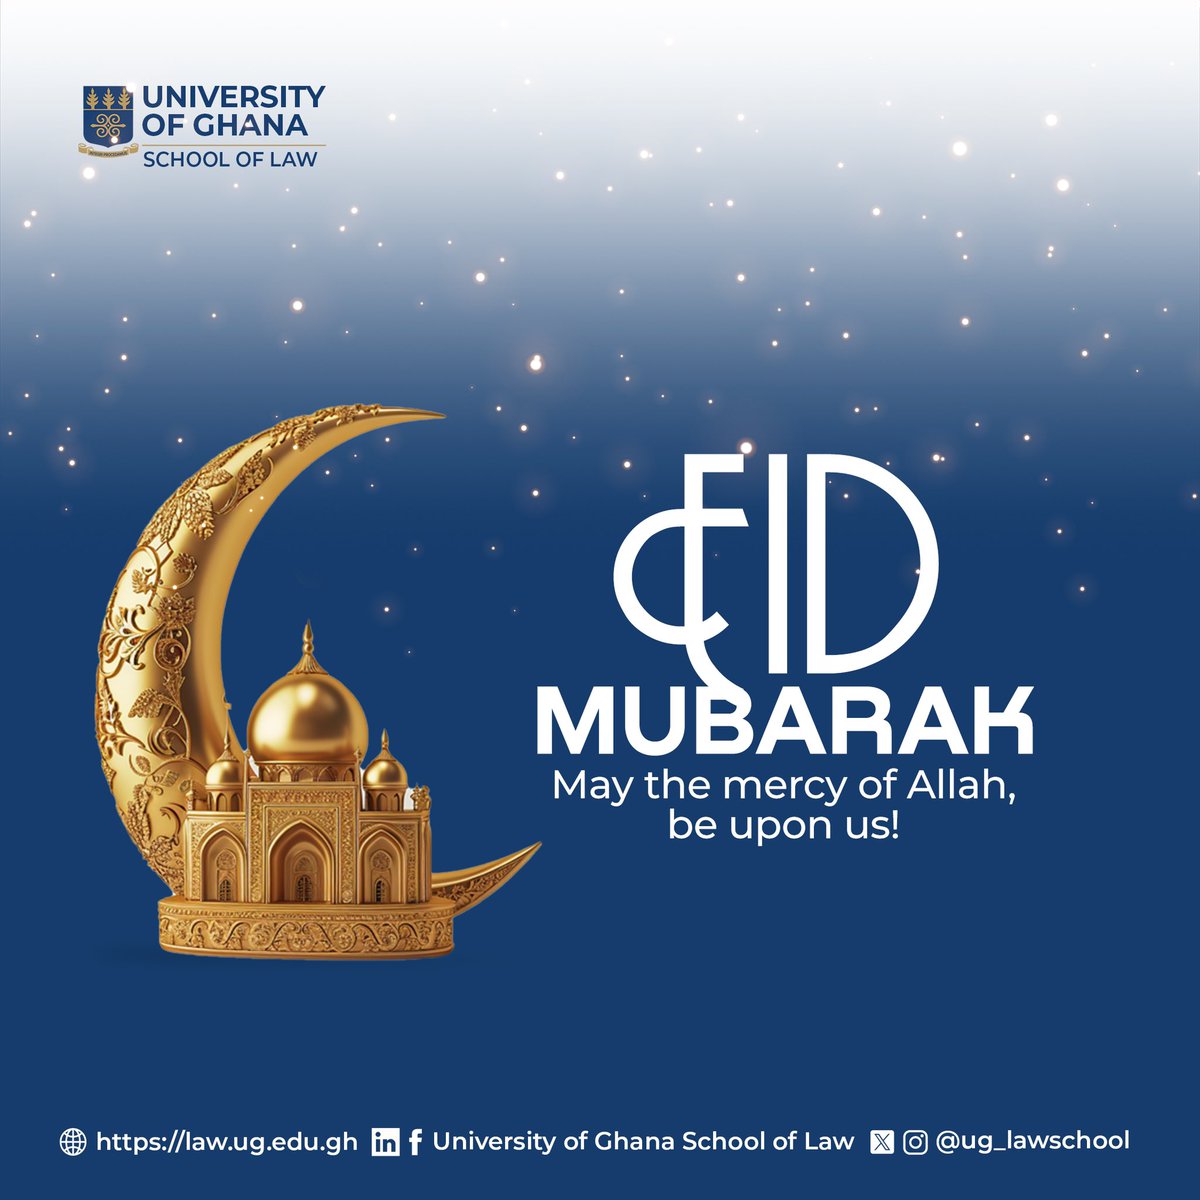 Warmest wishes to you and your family on this joyous occasion of Eid. May Allah accept your prayers and grant you peace and happiness. Eid Mubarak! 🌷🌙 #UGSoL #law #Eid2024 #schooloflaw #EidAlFitr2024 #Eid_Mubarak